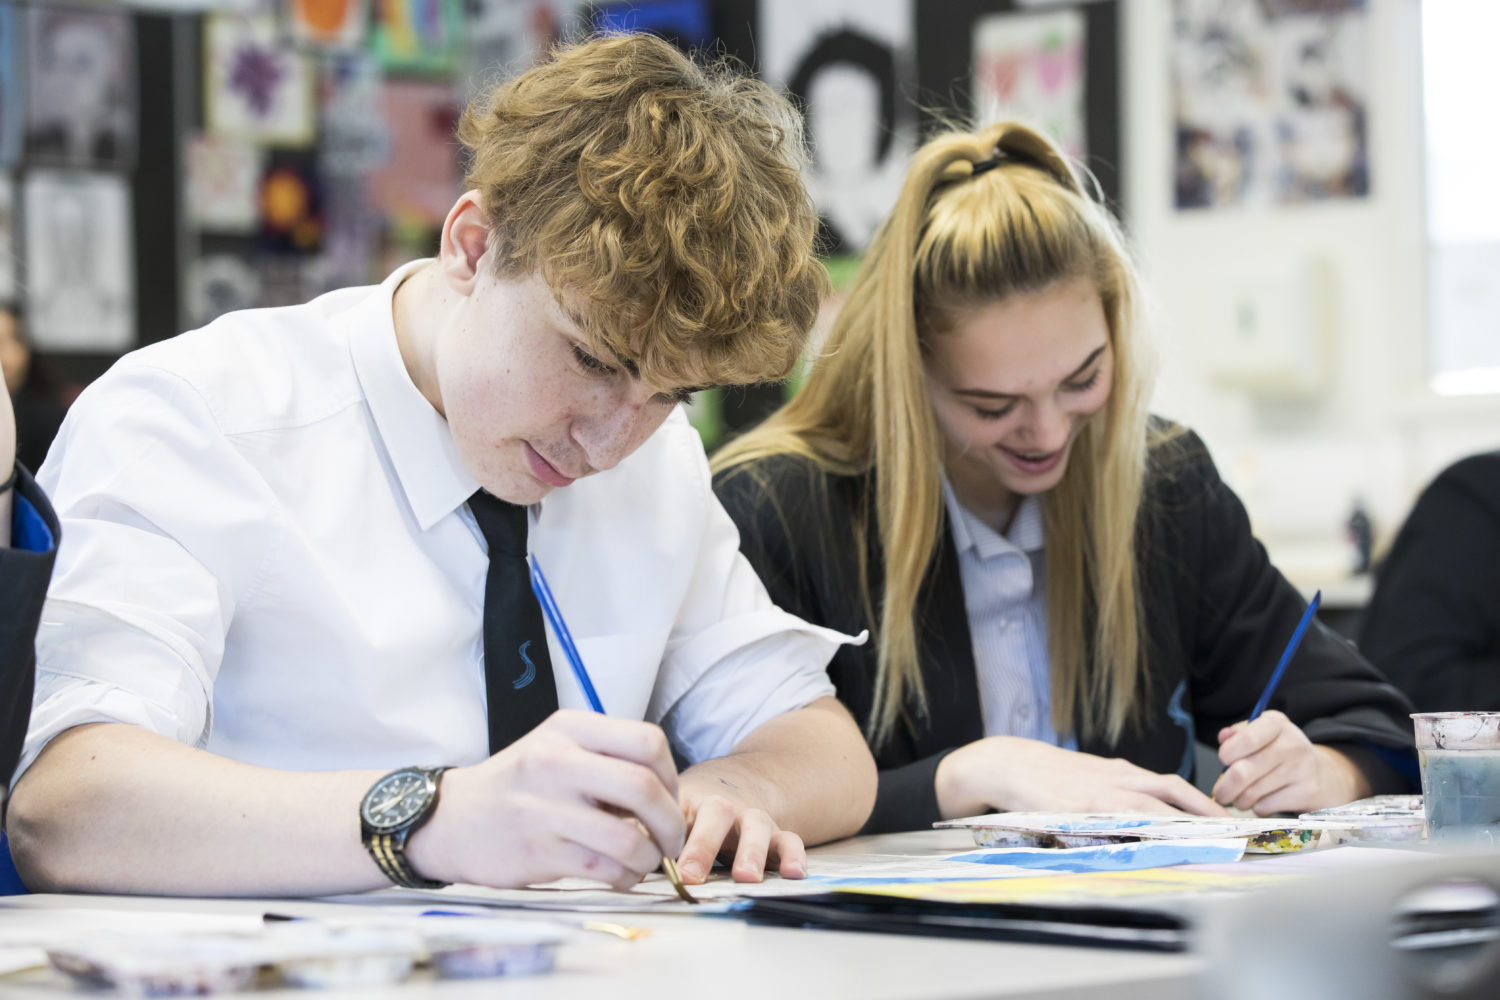 Two Strood Academy students are pictured painting during an Art lesson.